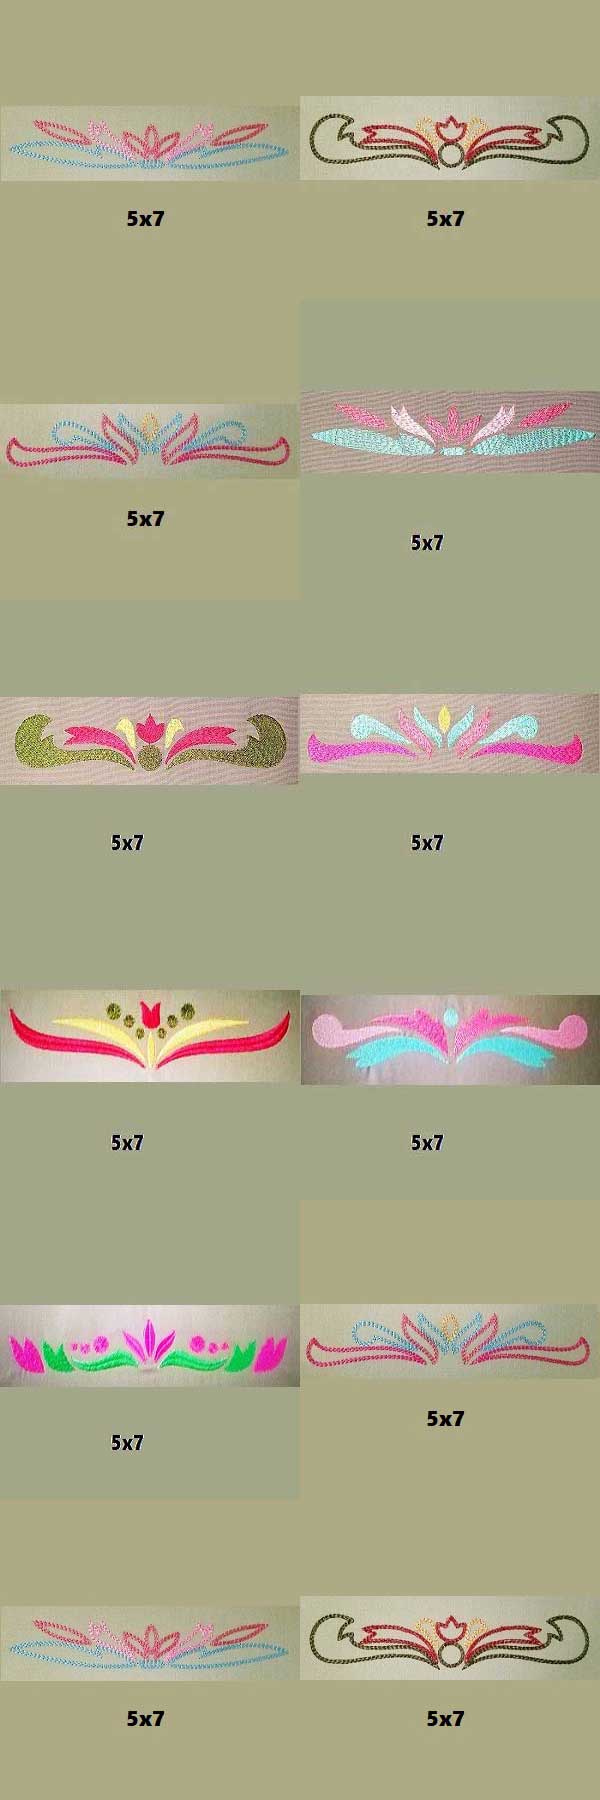 Damask Borders Embroidery Machine Design Details